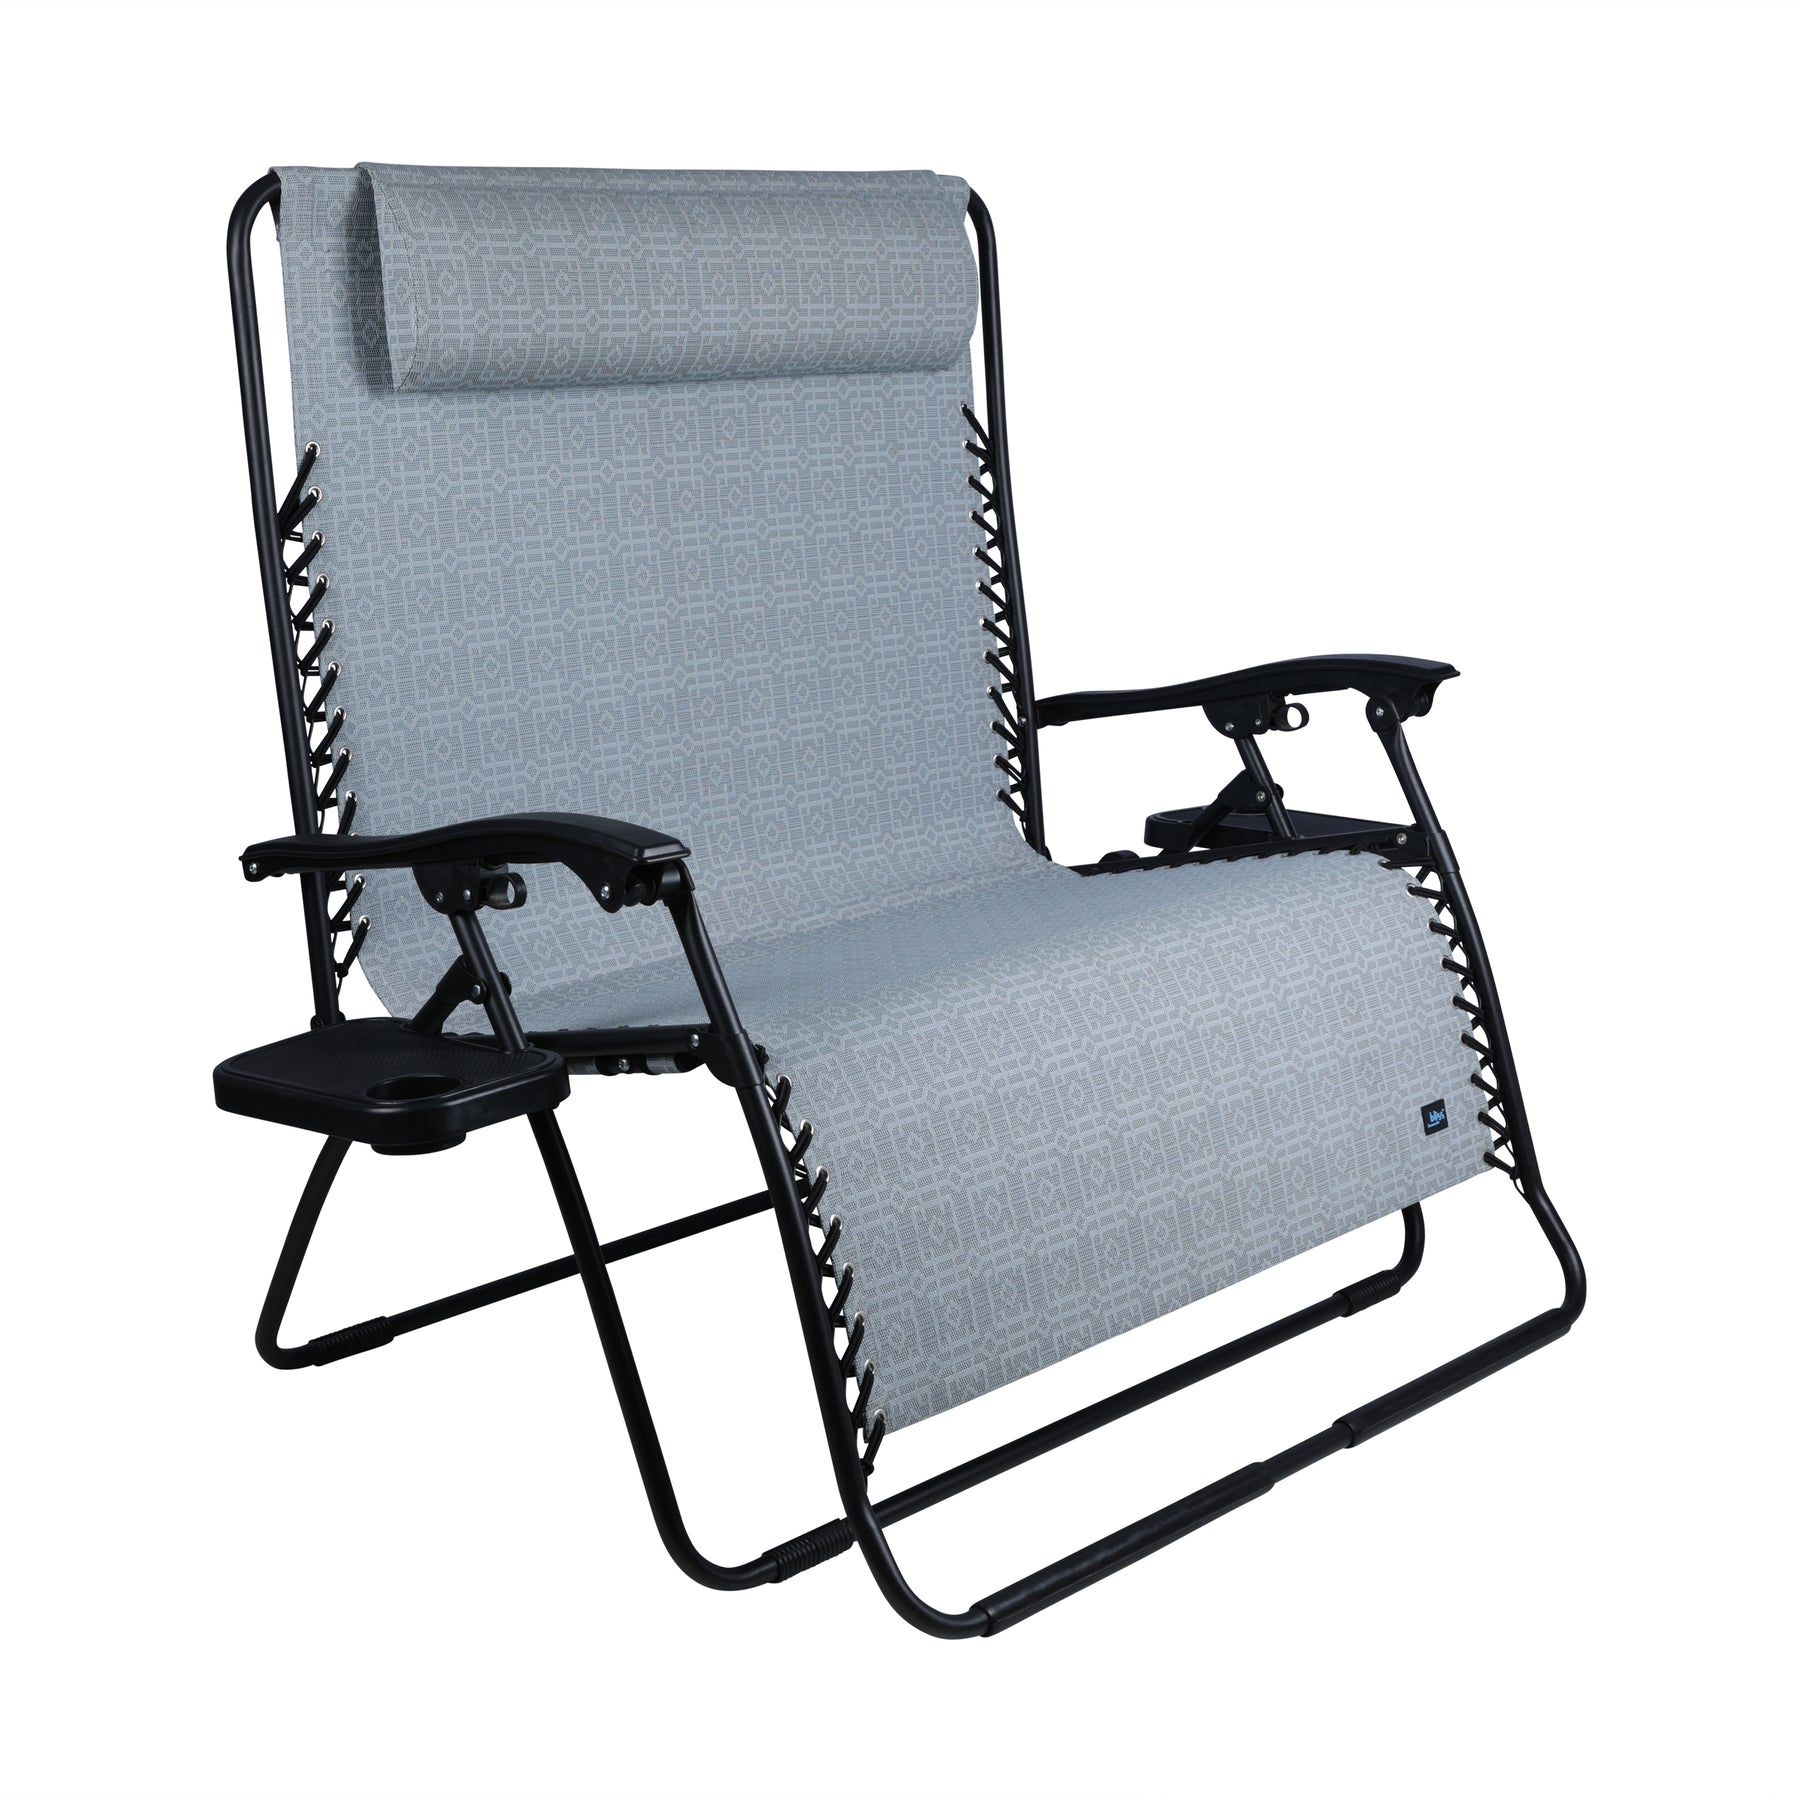 Bliss Hammocks 45-inch Wide 2-Person Zero Gravity Chair with Pillow and Drink Tray in the gray variation.